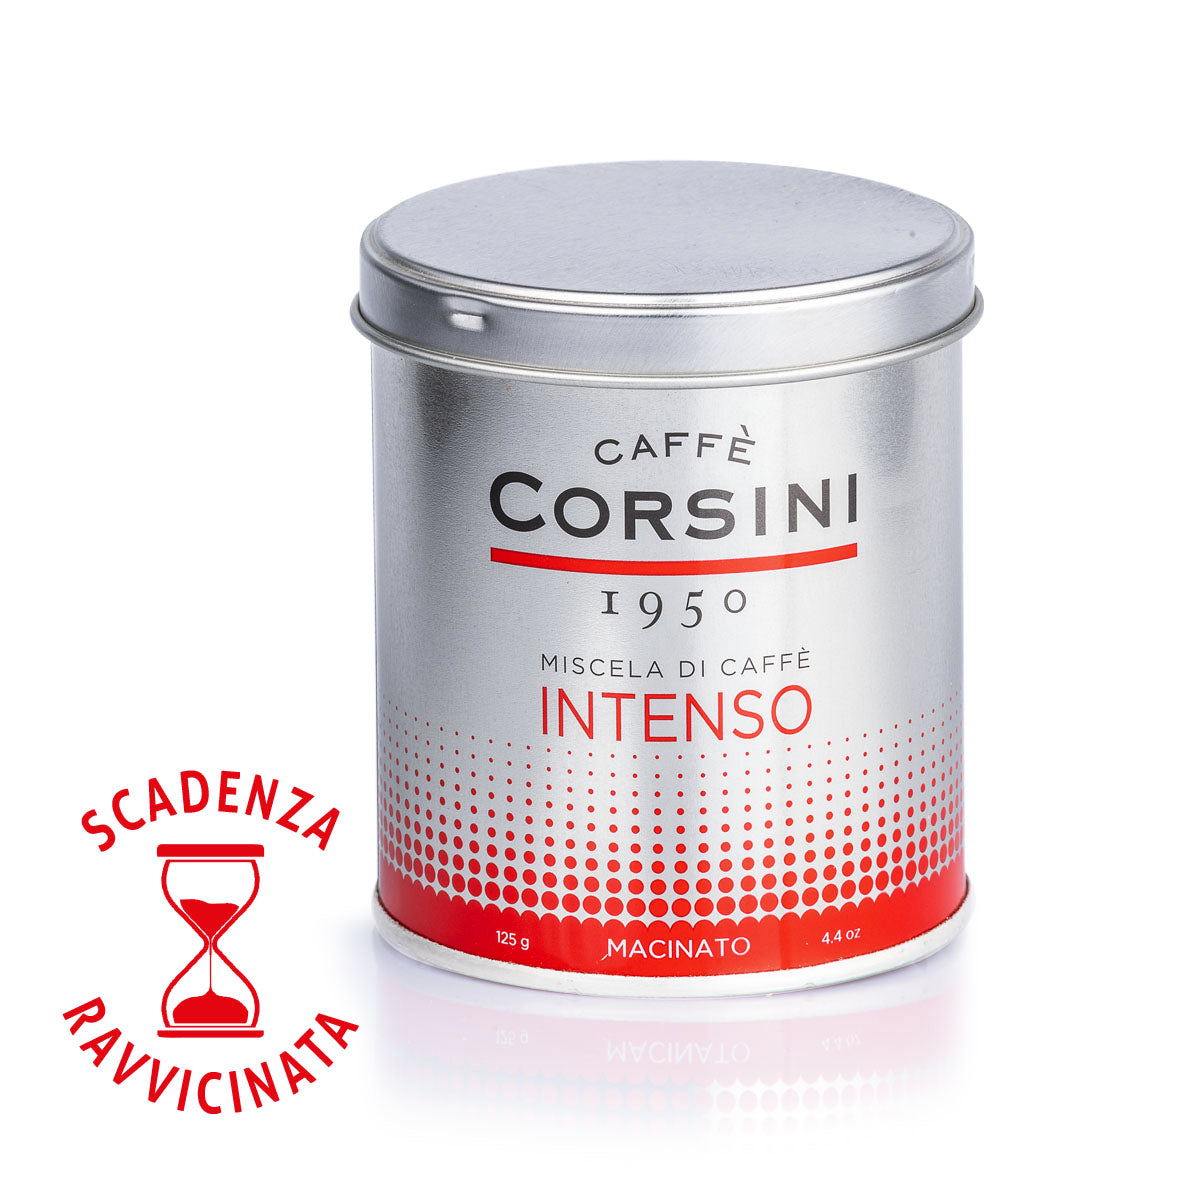 Ground coffee | CORSINI INTENSO | Can of 125g